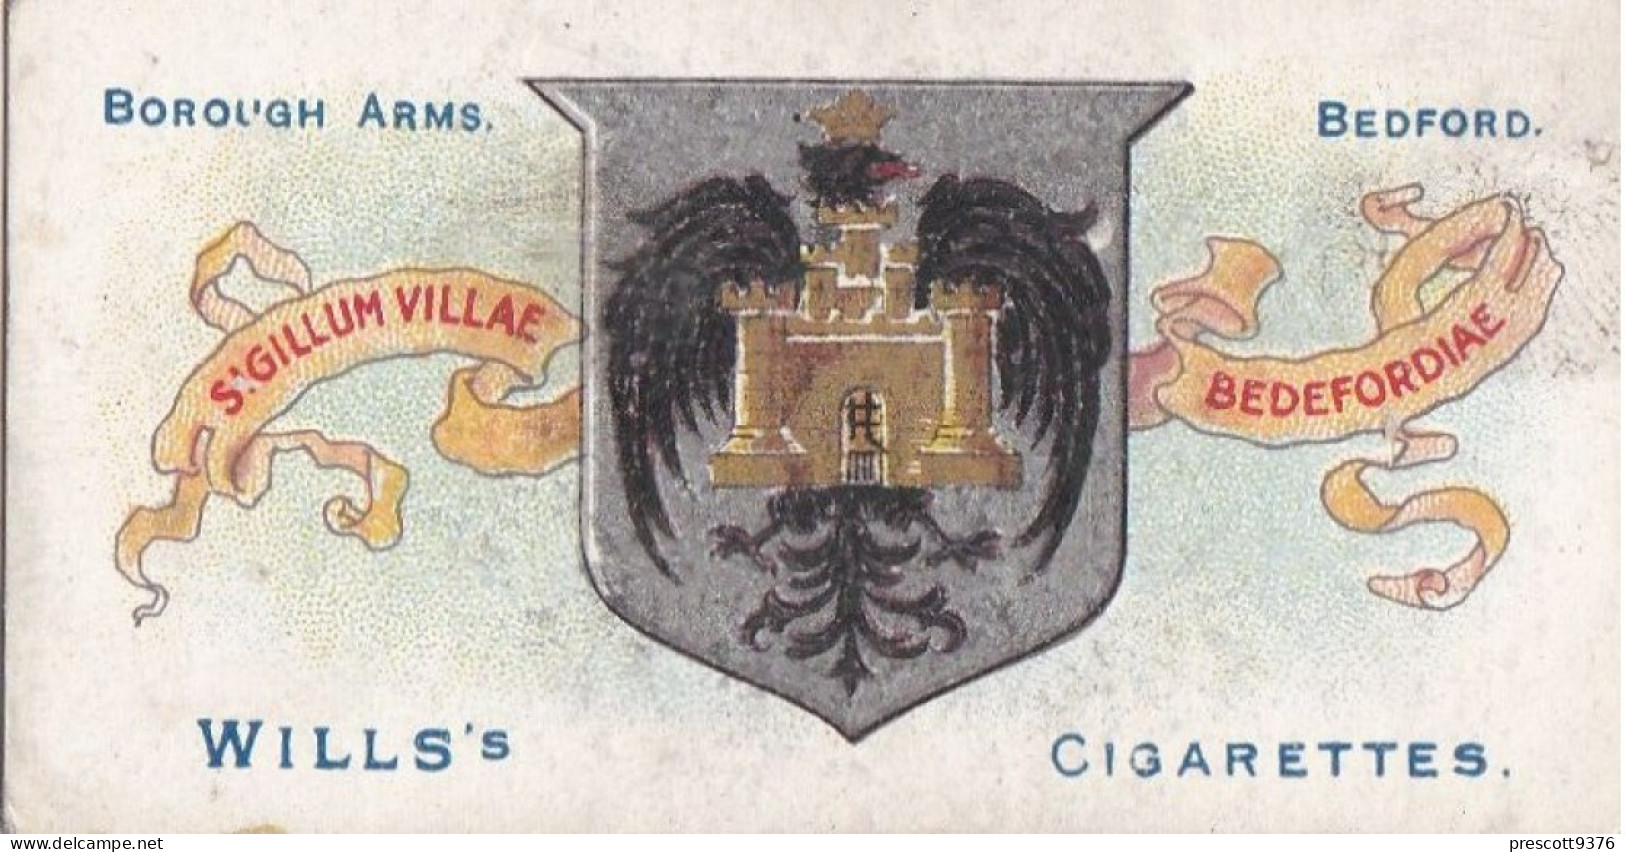 62 BEDFORD - Town Arms 2nd Series 1906 - Wills Cigarette Card - Original  - Antique - Wills